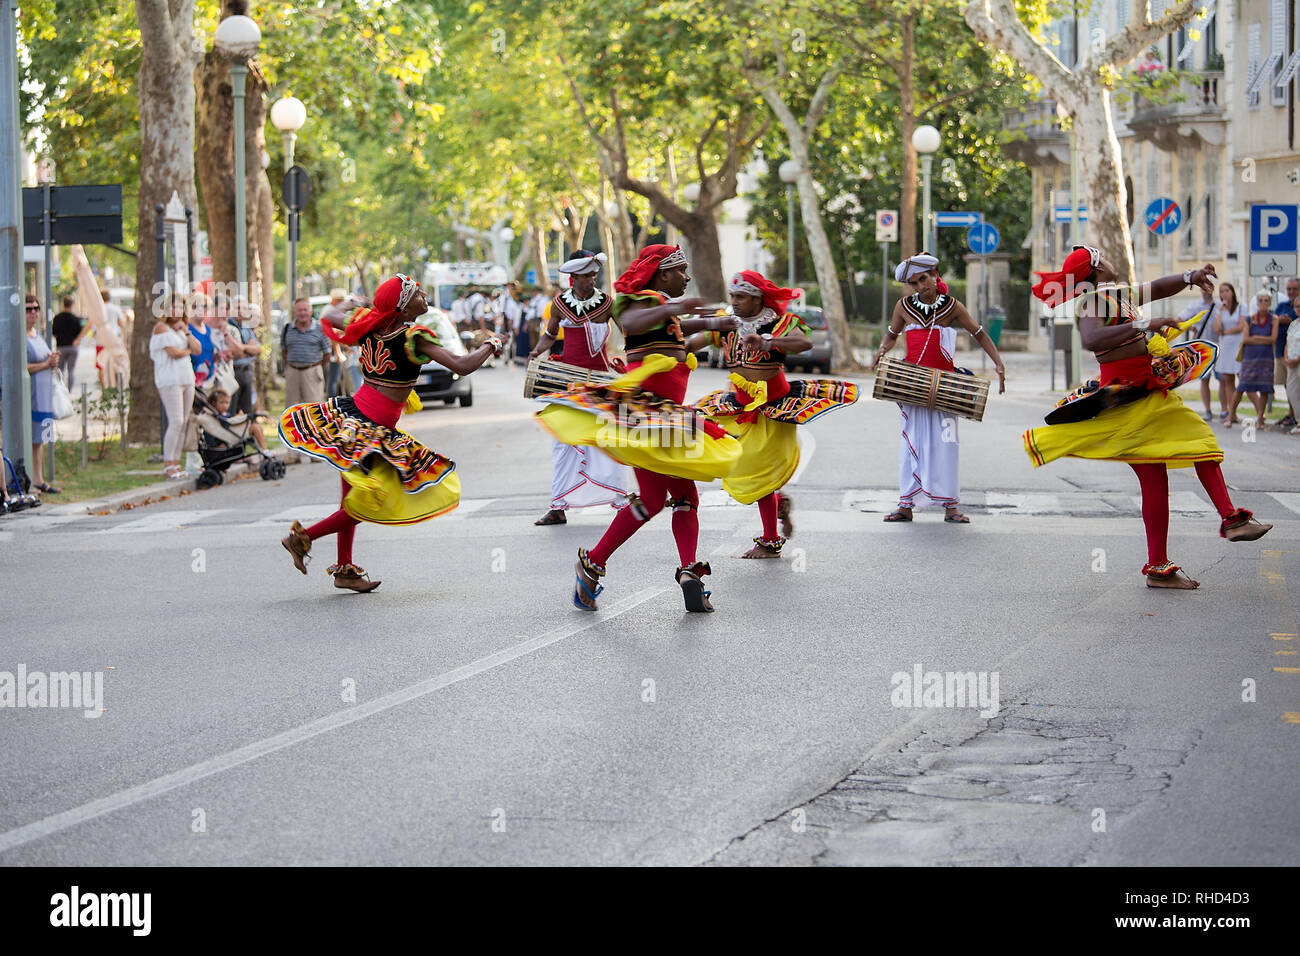 Gorizia, Italy - August 27, 2017: Dancers of Sri Lanka traditional dance company on the town street during the International Folklore Festival Stock Photo